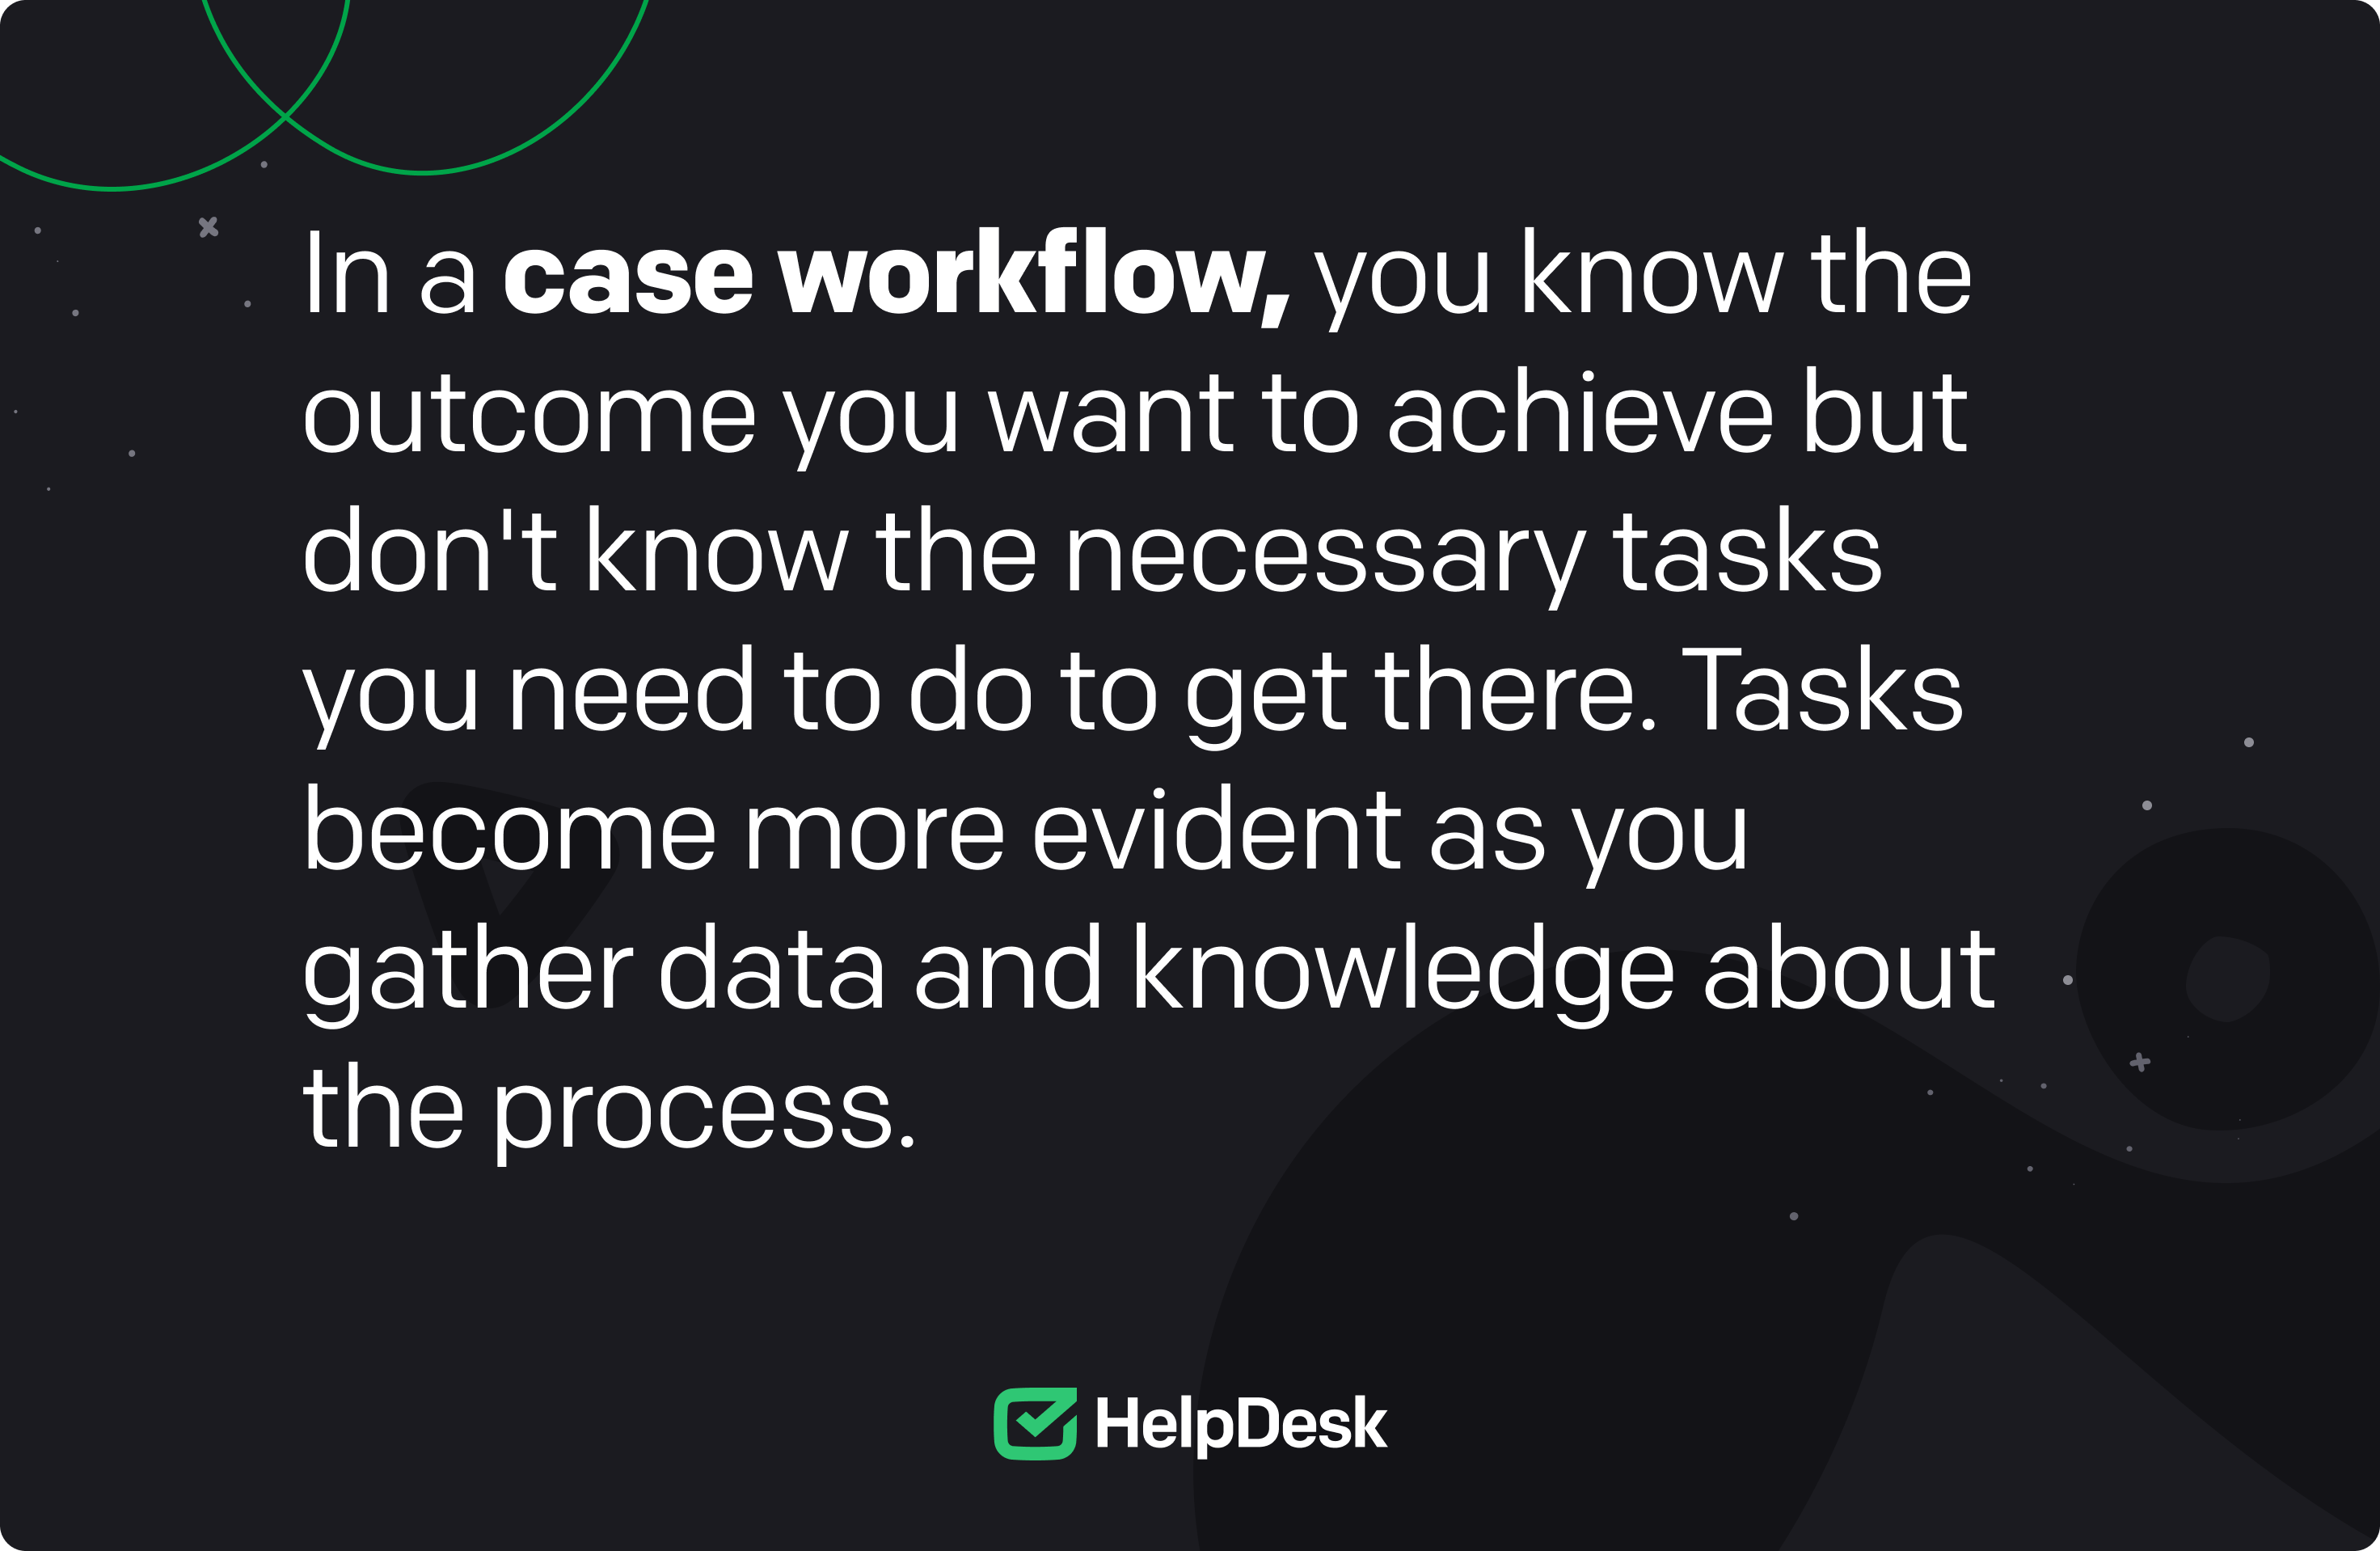 A definition of the case workflow.